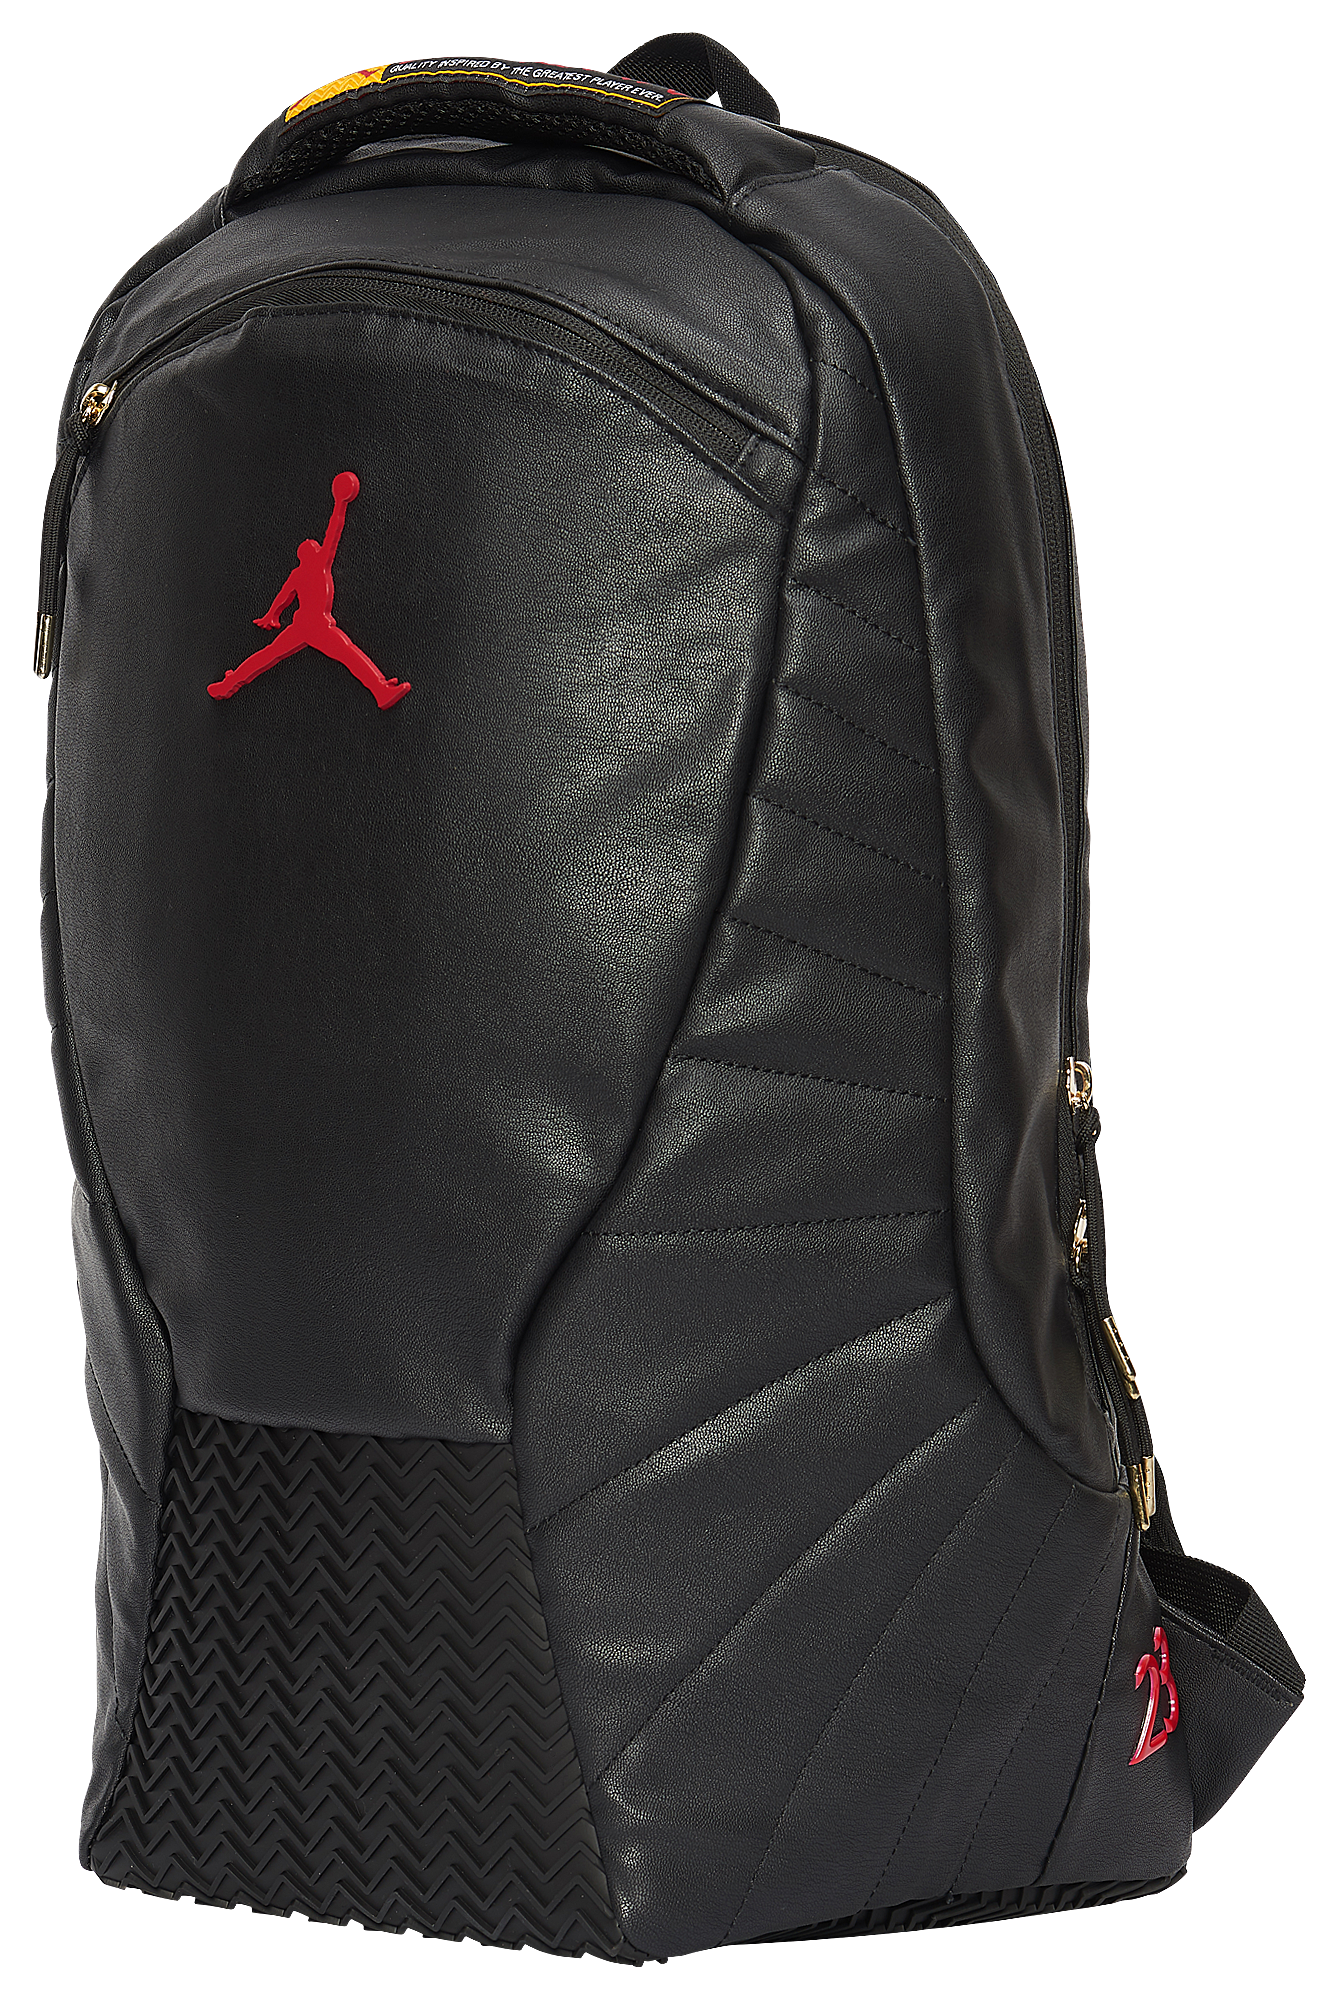 jordan backpack red and white